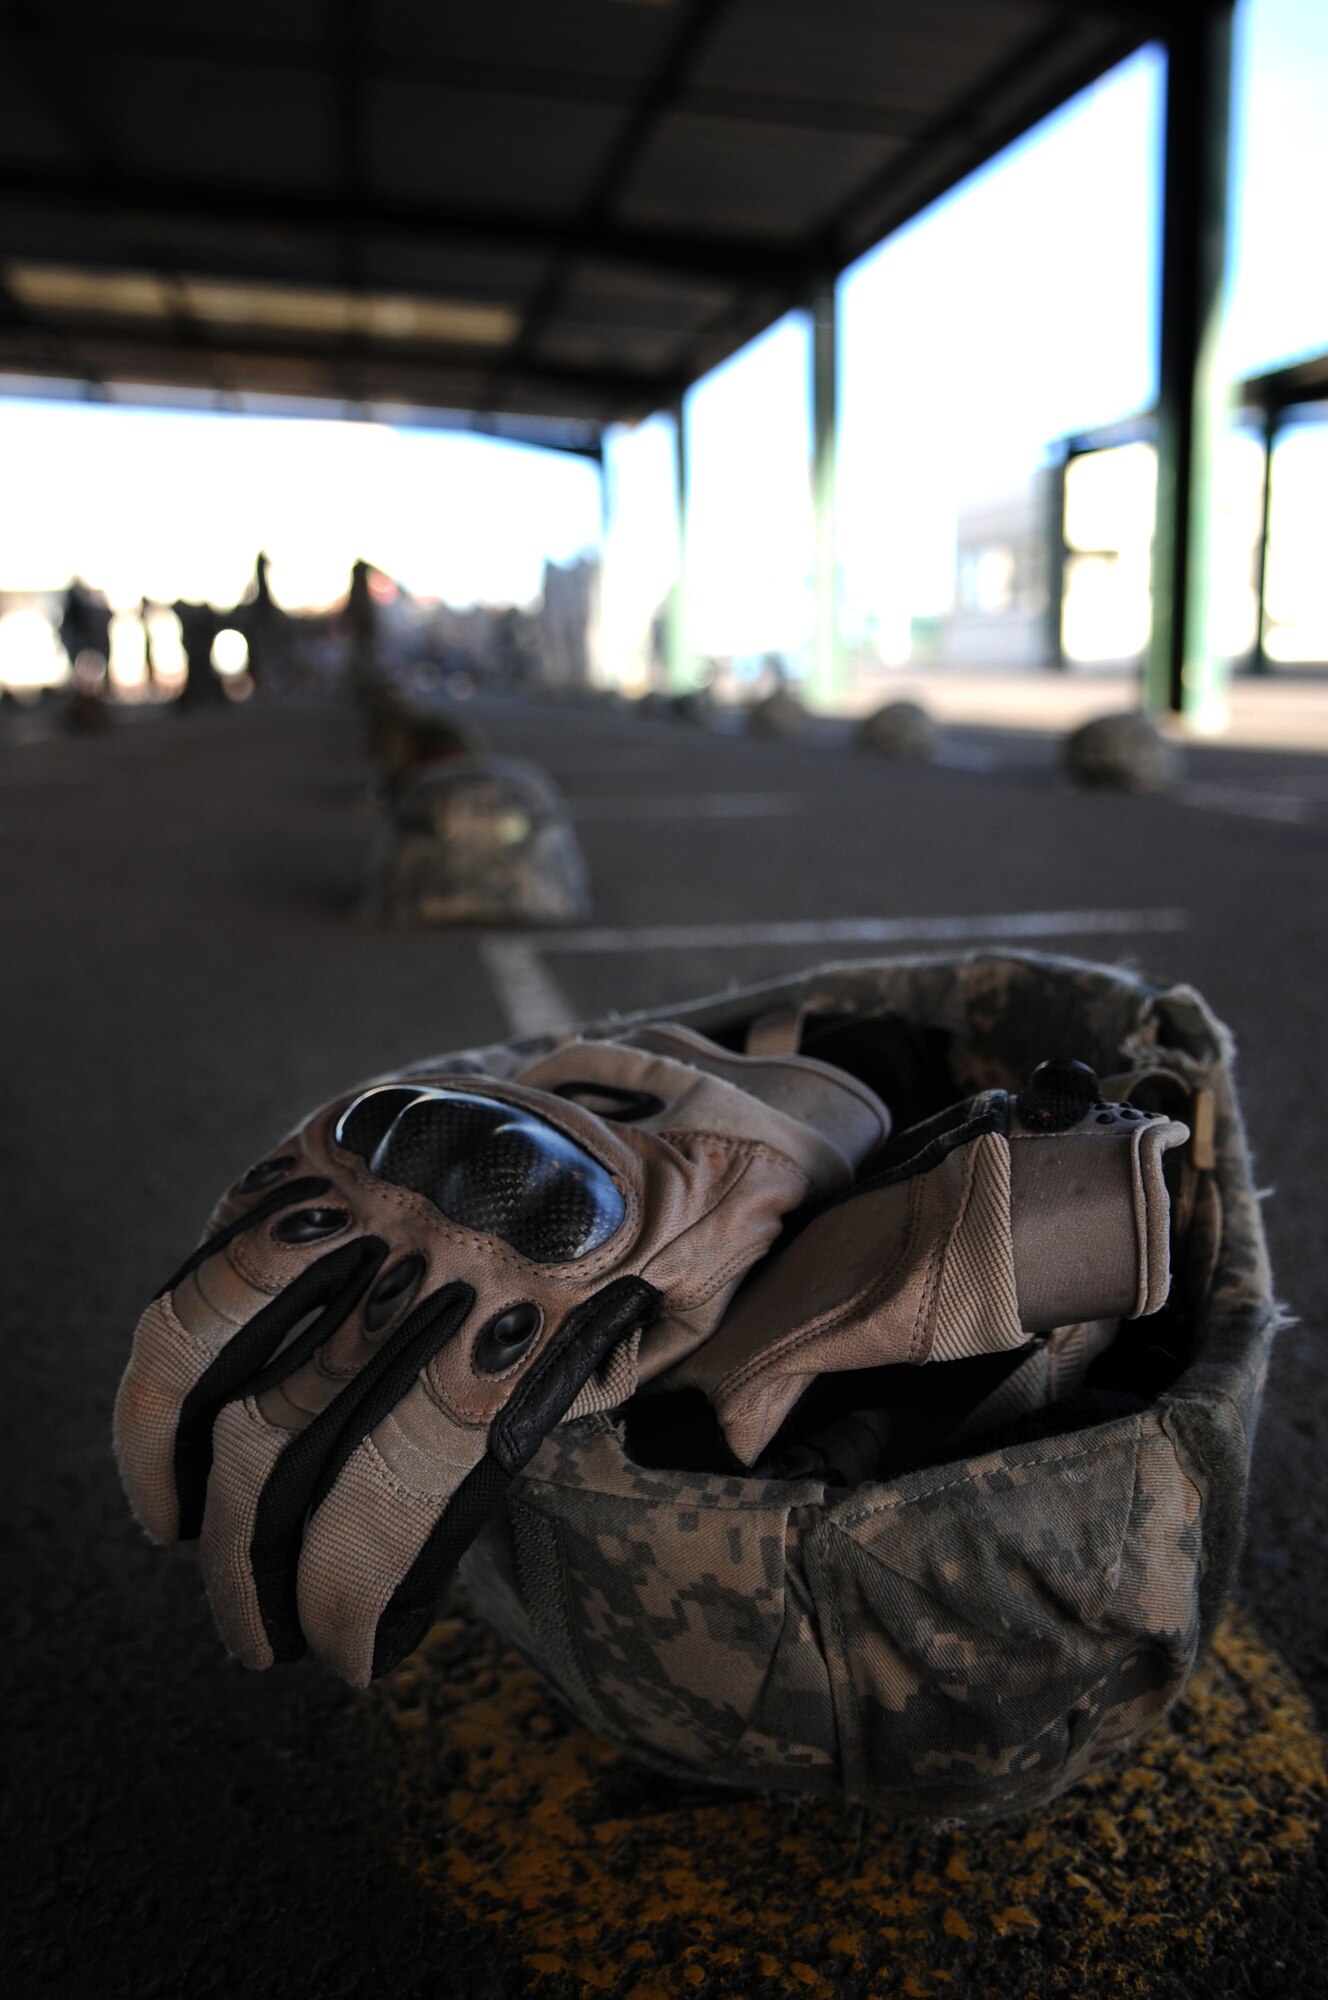 A pair of gloves rest in a helmet while members of the French and U.S. military review proper jump procedures using U.S. military equipment on March, 2, 2010.  Members of the 435th Contingency Response Group and the 5th Quartermaster Company joined with their French military counterparts for a week of training at the École des troupes aéroportées (ETAP), or School of Airborne Troops, a military school dedicated to training the military paratroopers   of the French army, located in the town of Pau, in the département of Pyrénées-Atlantiques, France.  The ETAP is responsible for training paratroopers, and for international cooperation and promotion of paratroop culture. (U.S. Air Force Photo by Staff Sgt. Jocelyn Rich)